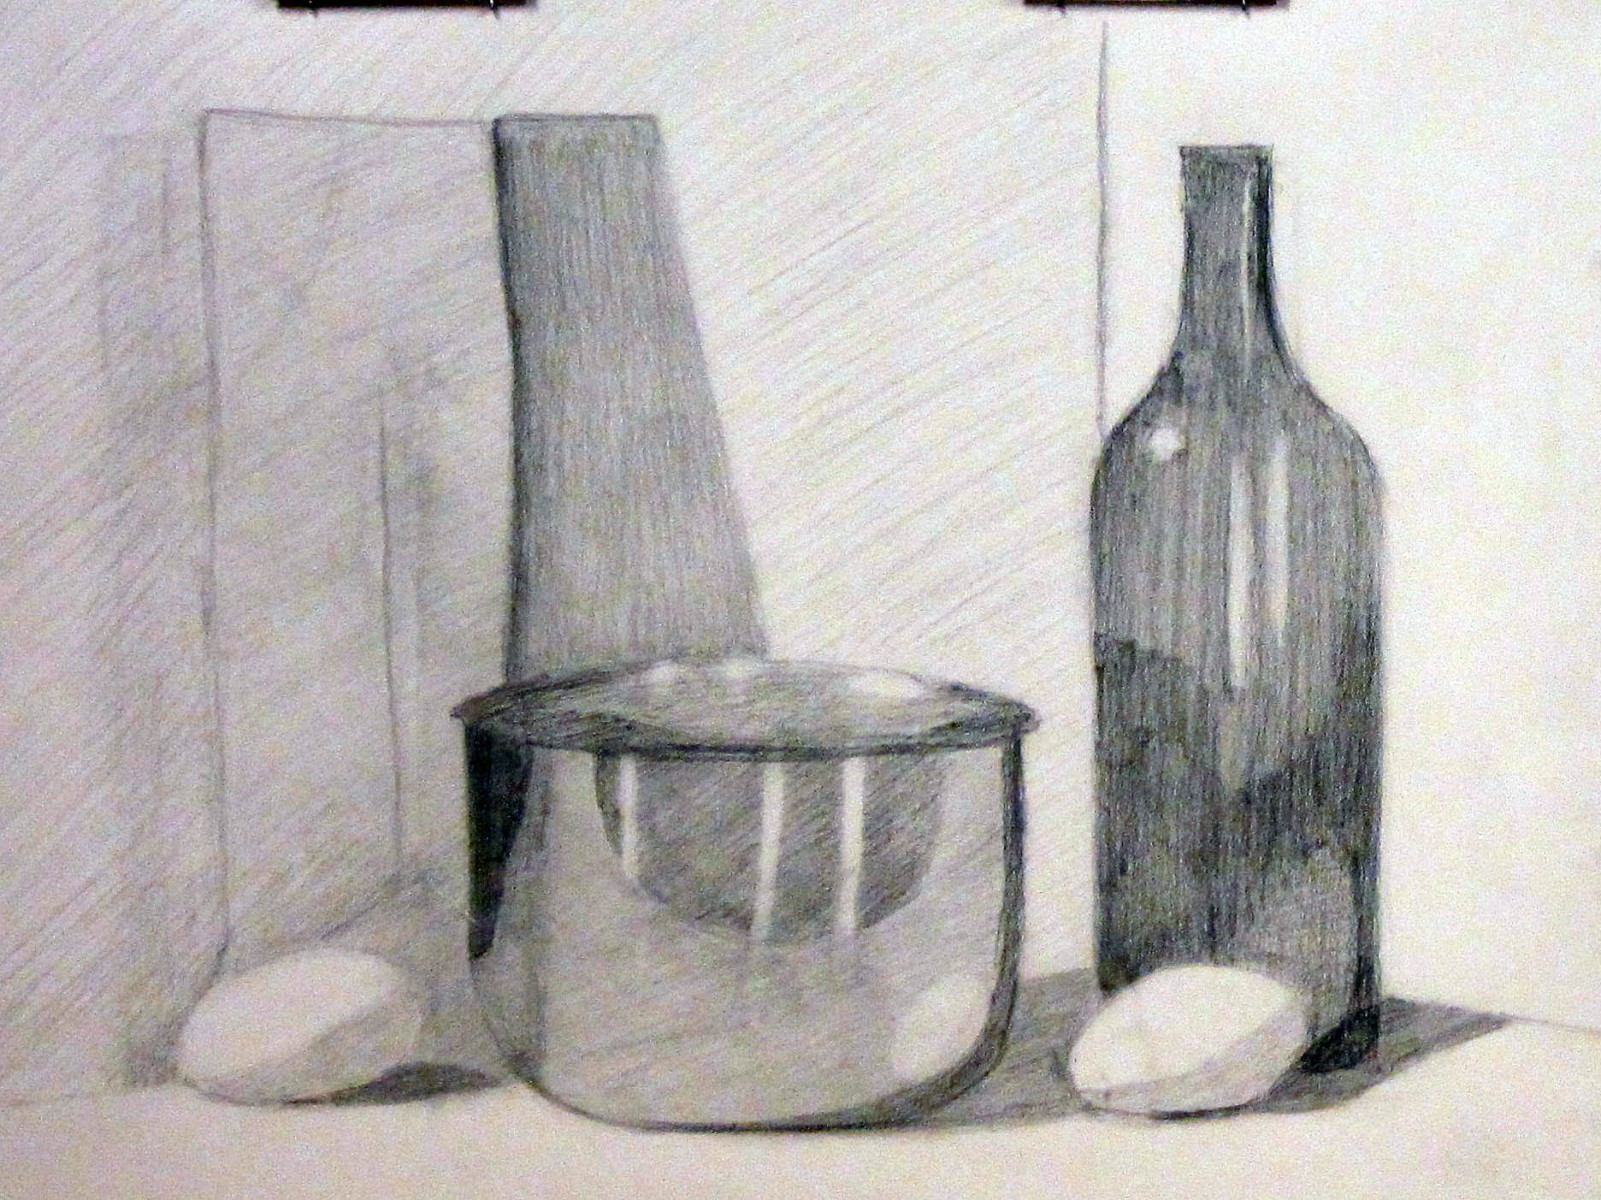 bowl-and-bottle